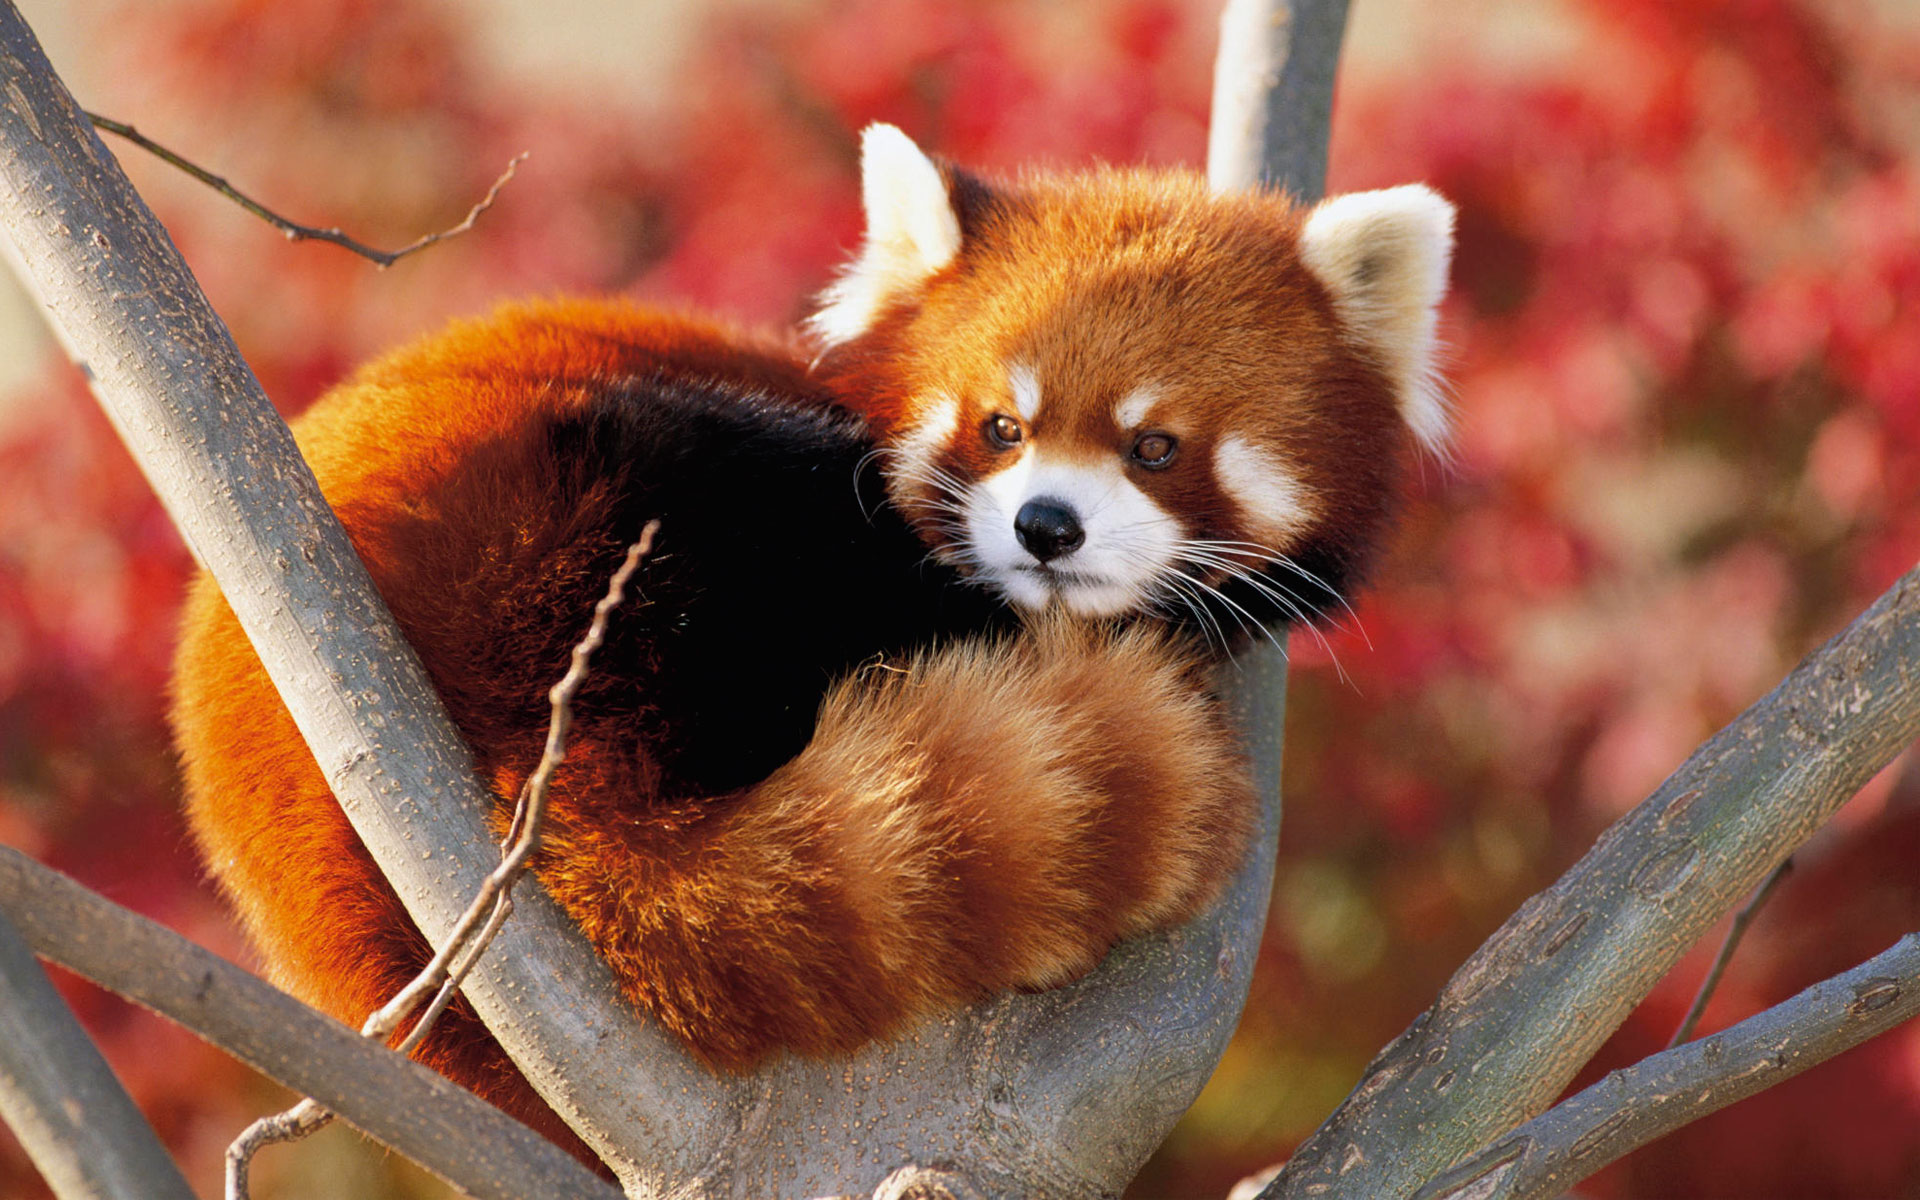 A playful red panda perched on a tree branch, looking adorable.